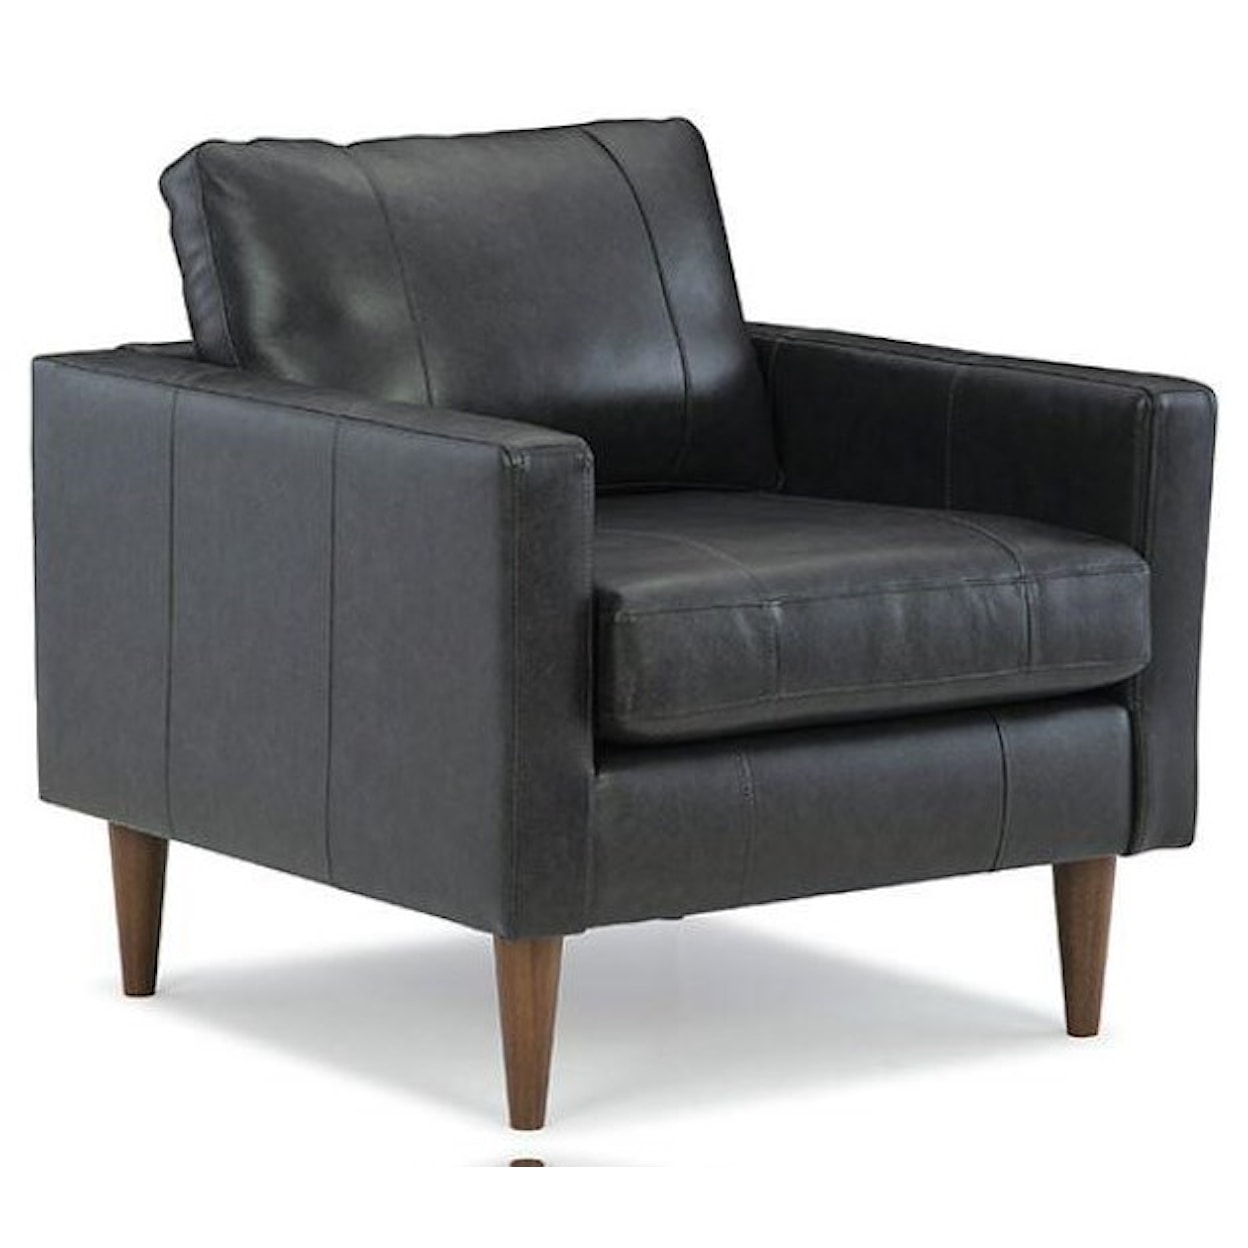 Best Home Furnishings Trafton Contemporary Chair